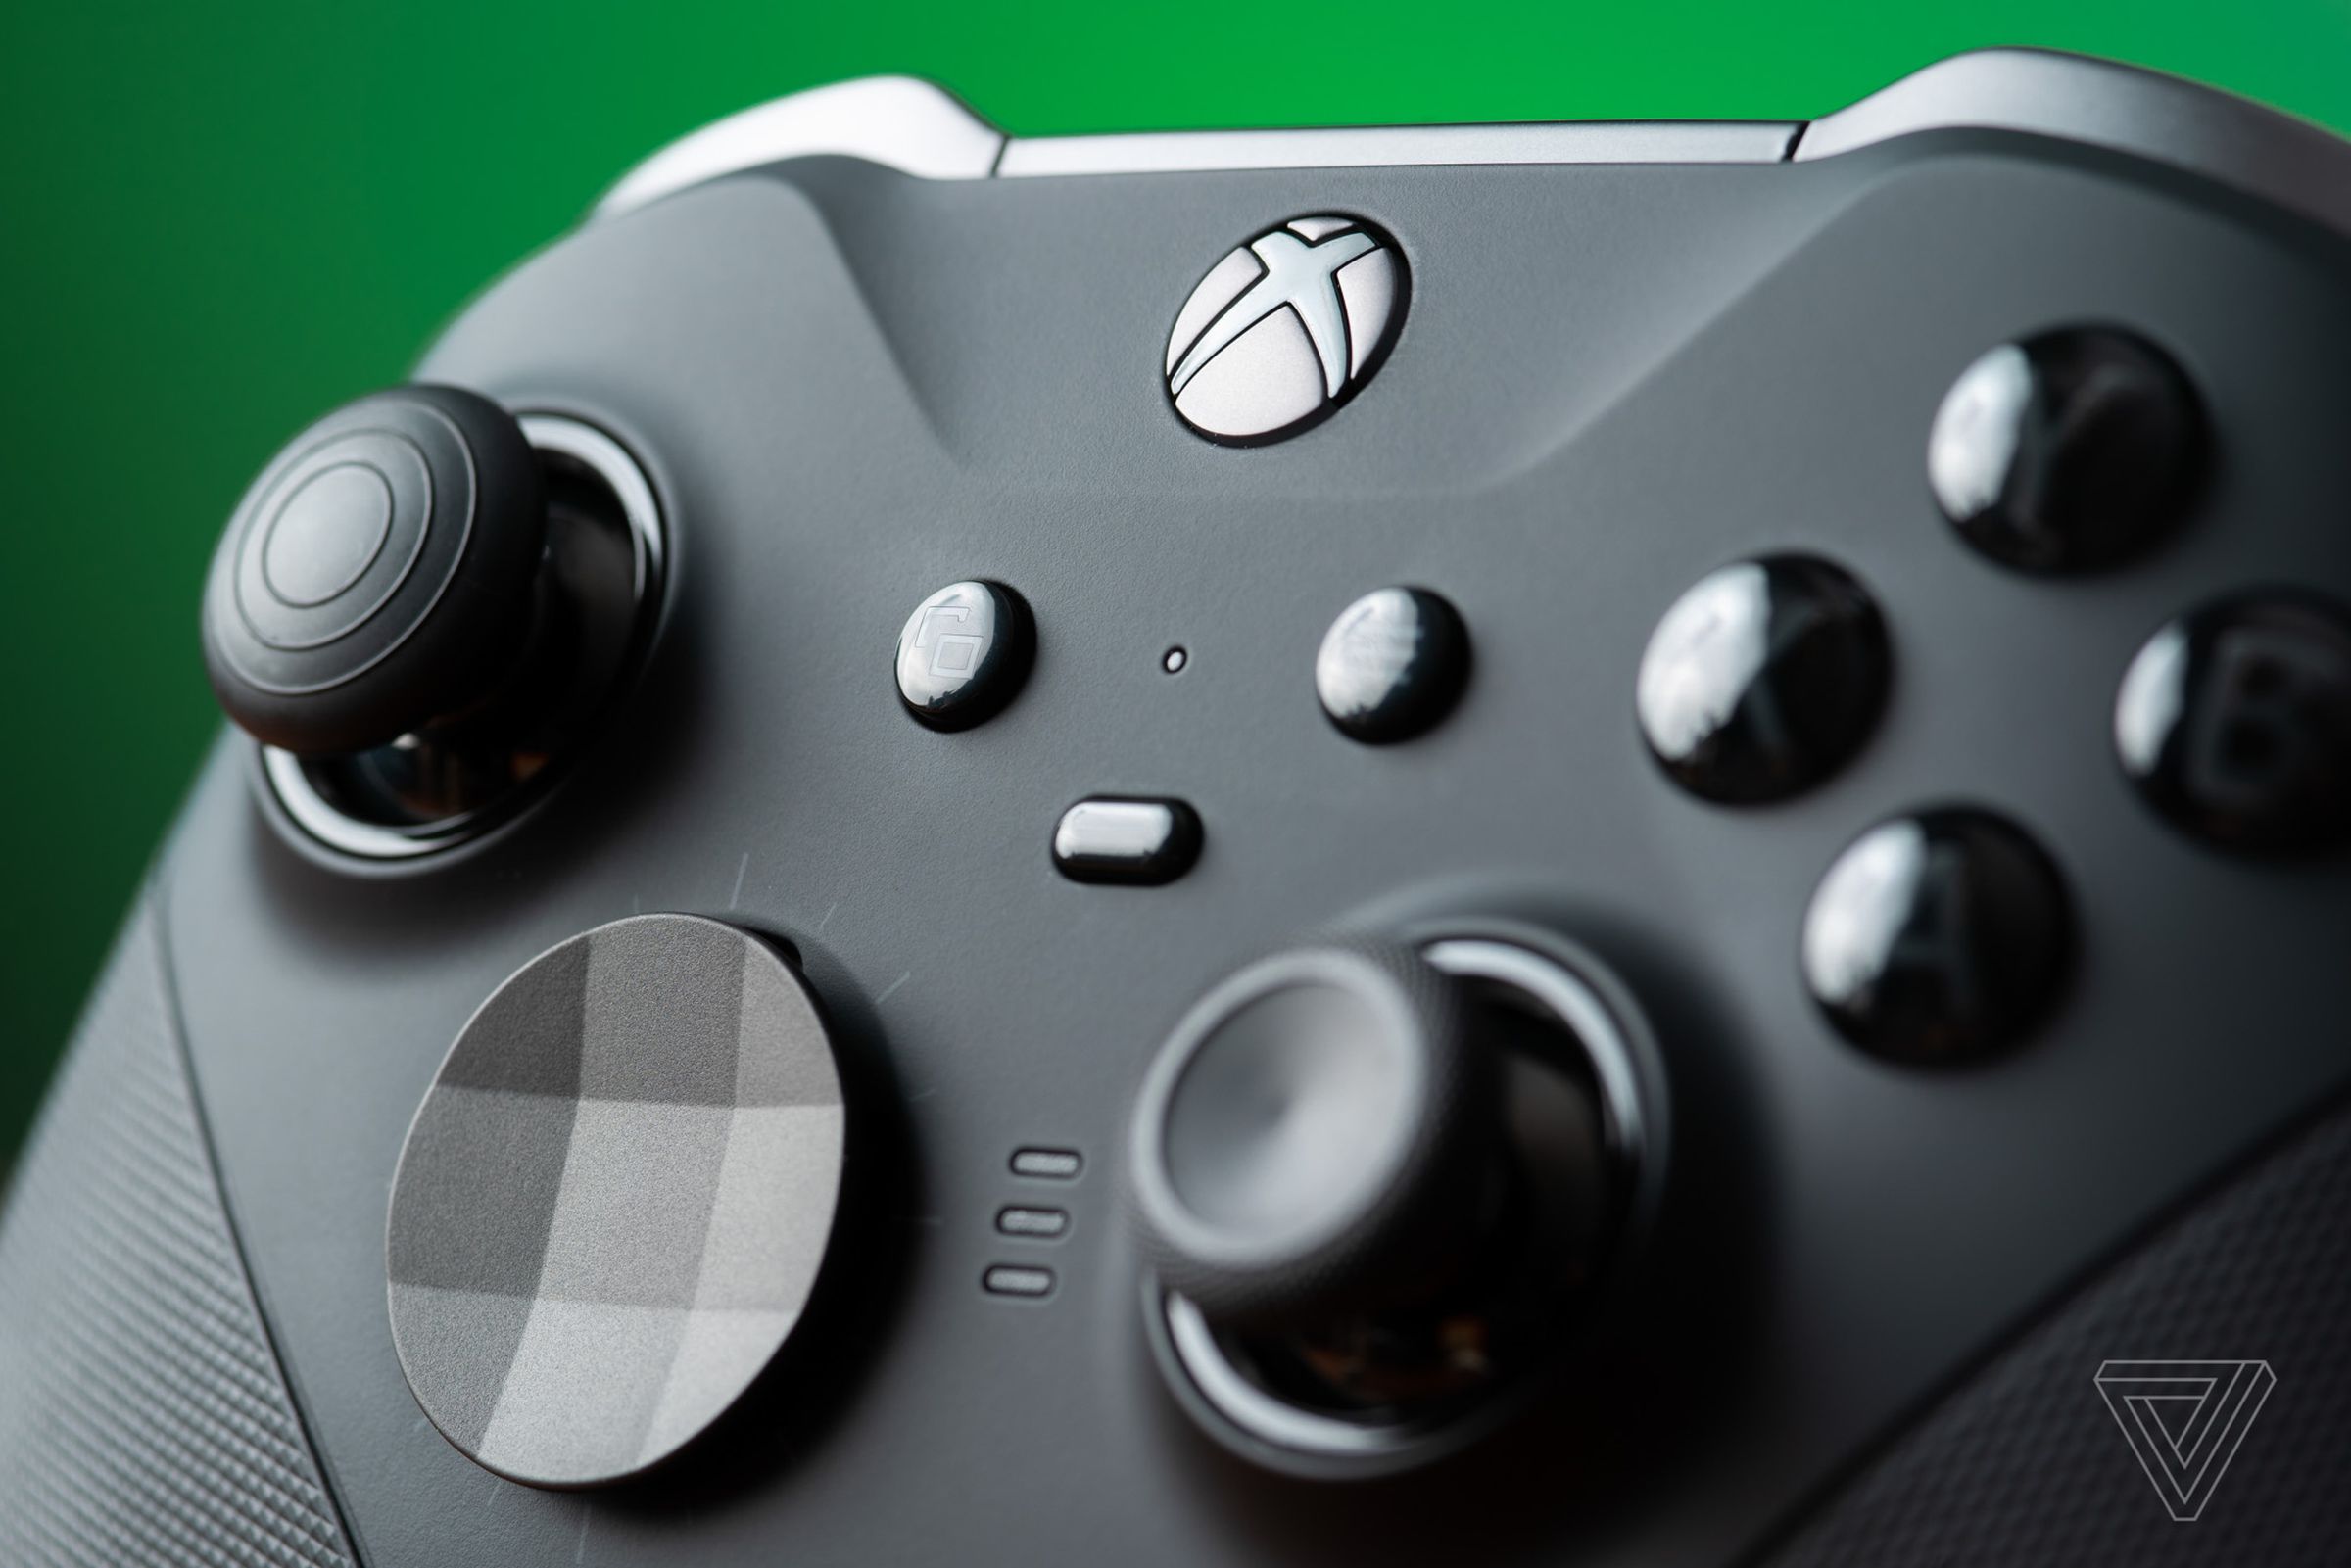 A close-up of the Xbox Elite Series 2 controller, showing its matte black finish.